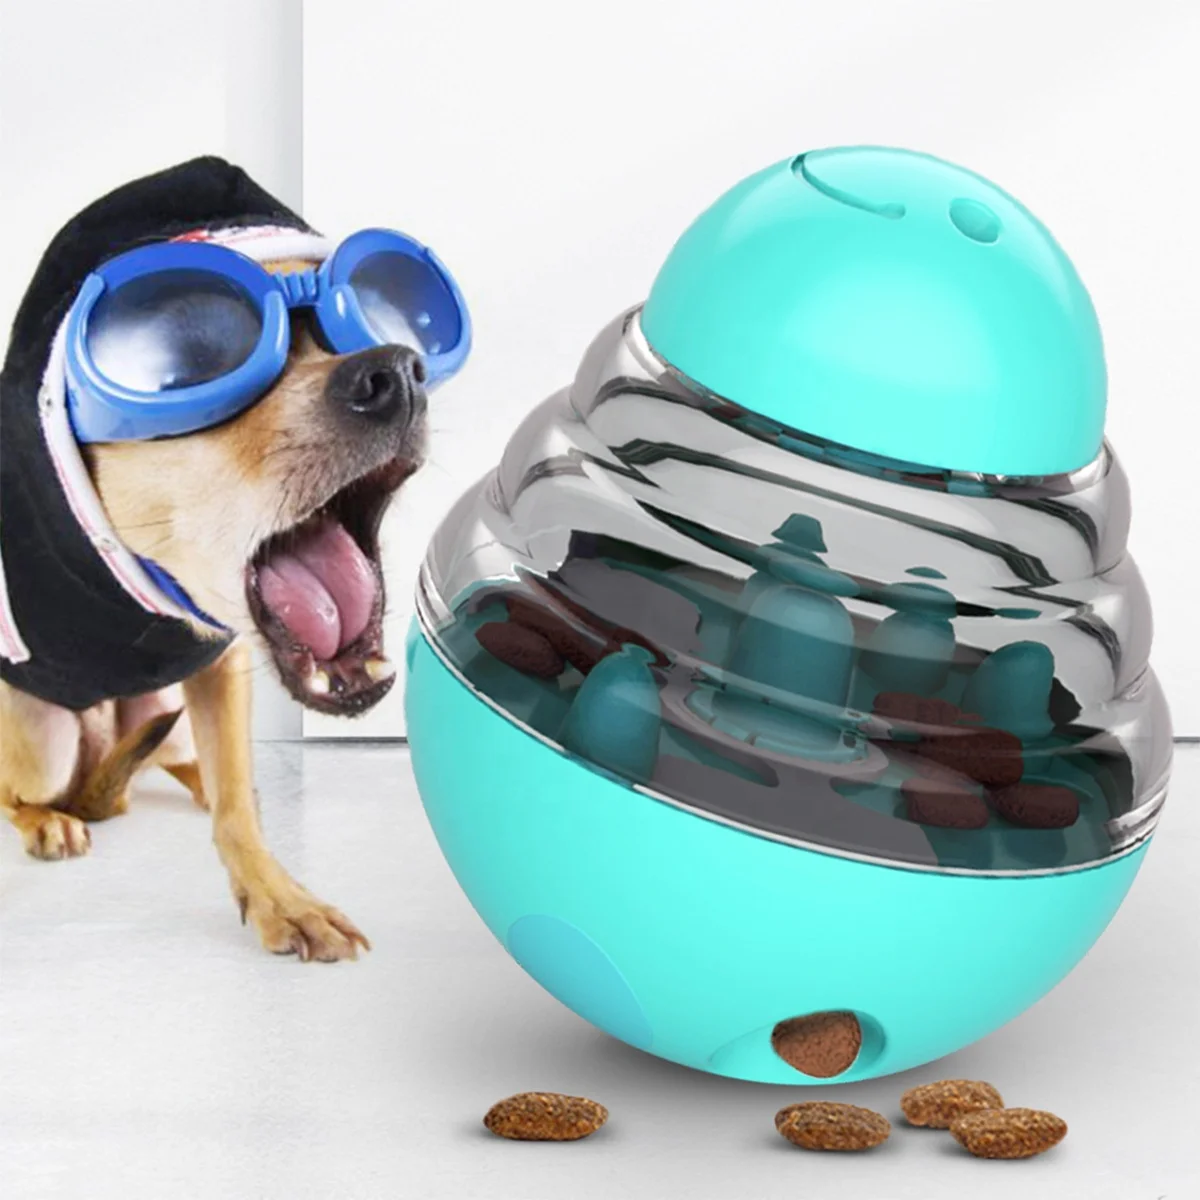 

Wholesale Pet Supplies Tumbler Treat Cat Toys Food Dispenser Treat Ball Dog Toy Leaky Ball Puppy Puzzle Toy